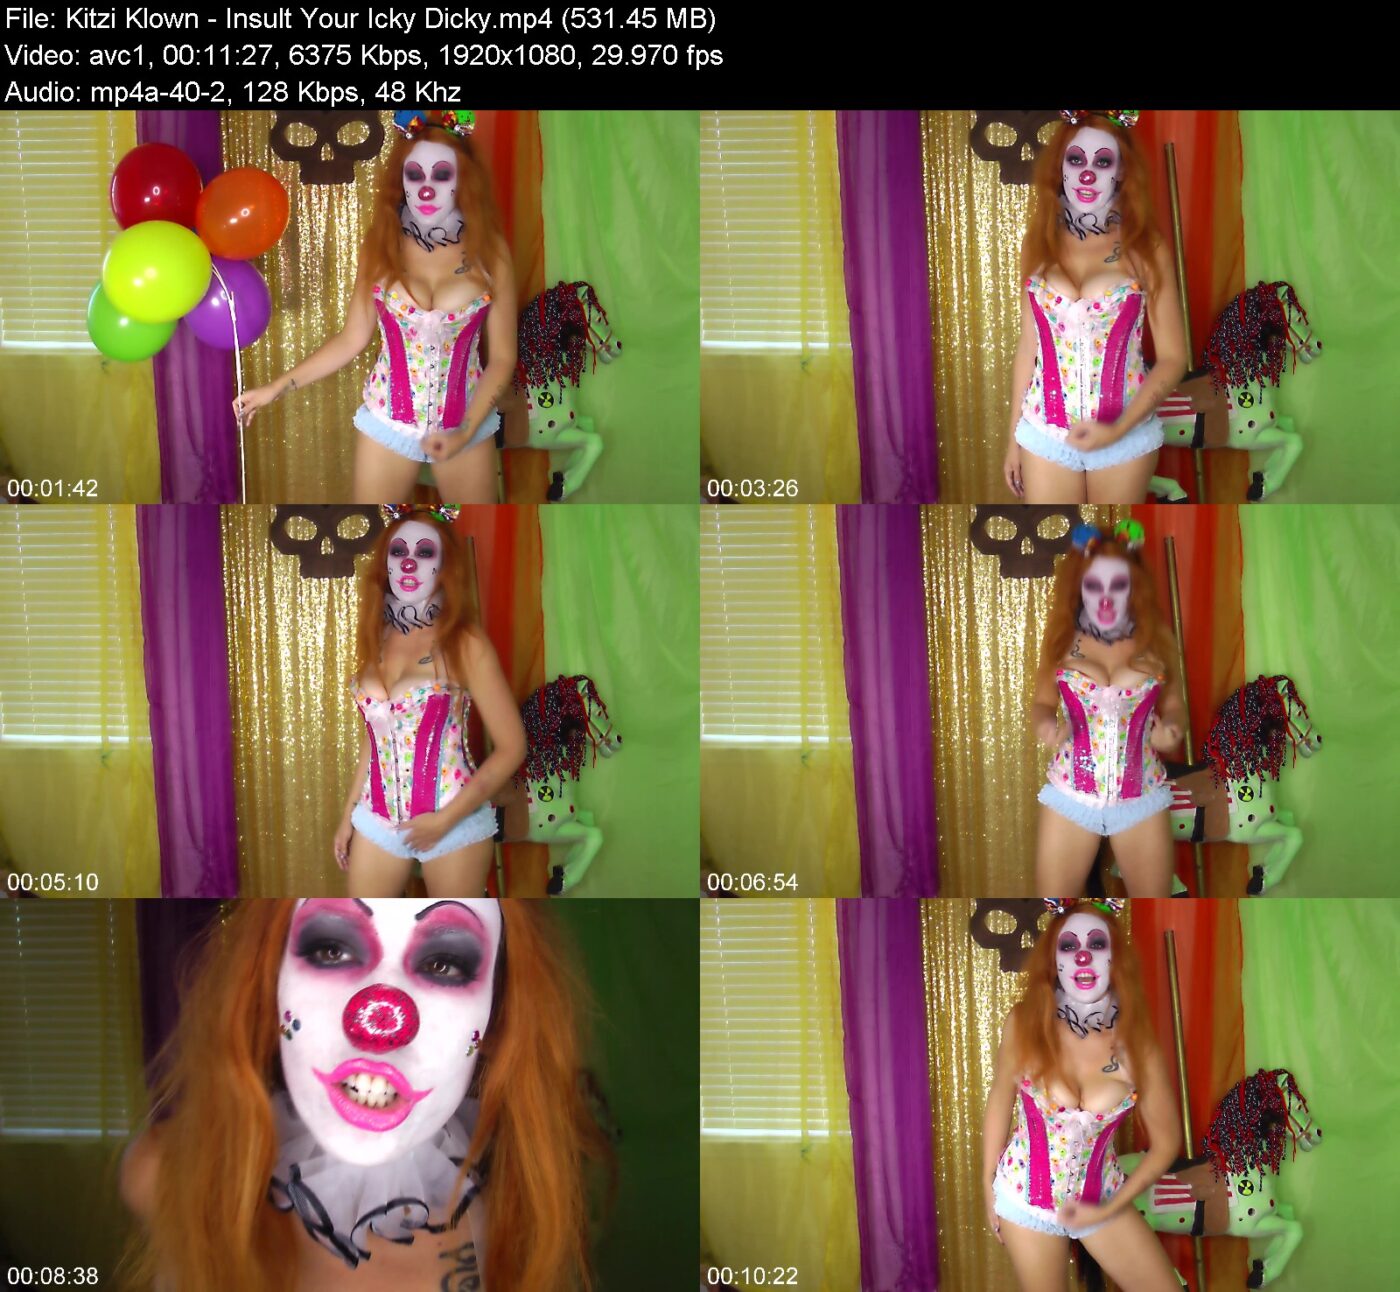 Actress: Kitzi Klown. Title and Studio: Insult Your Icky Dicky